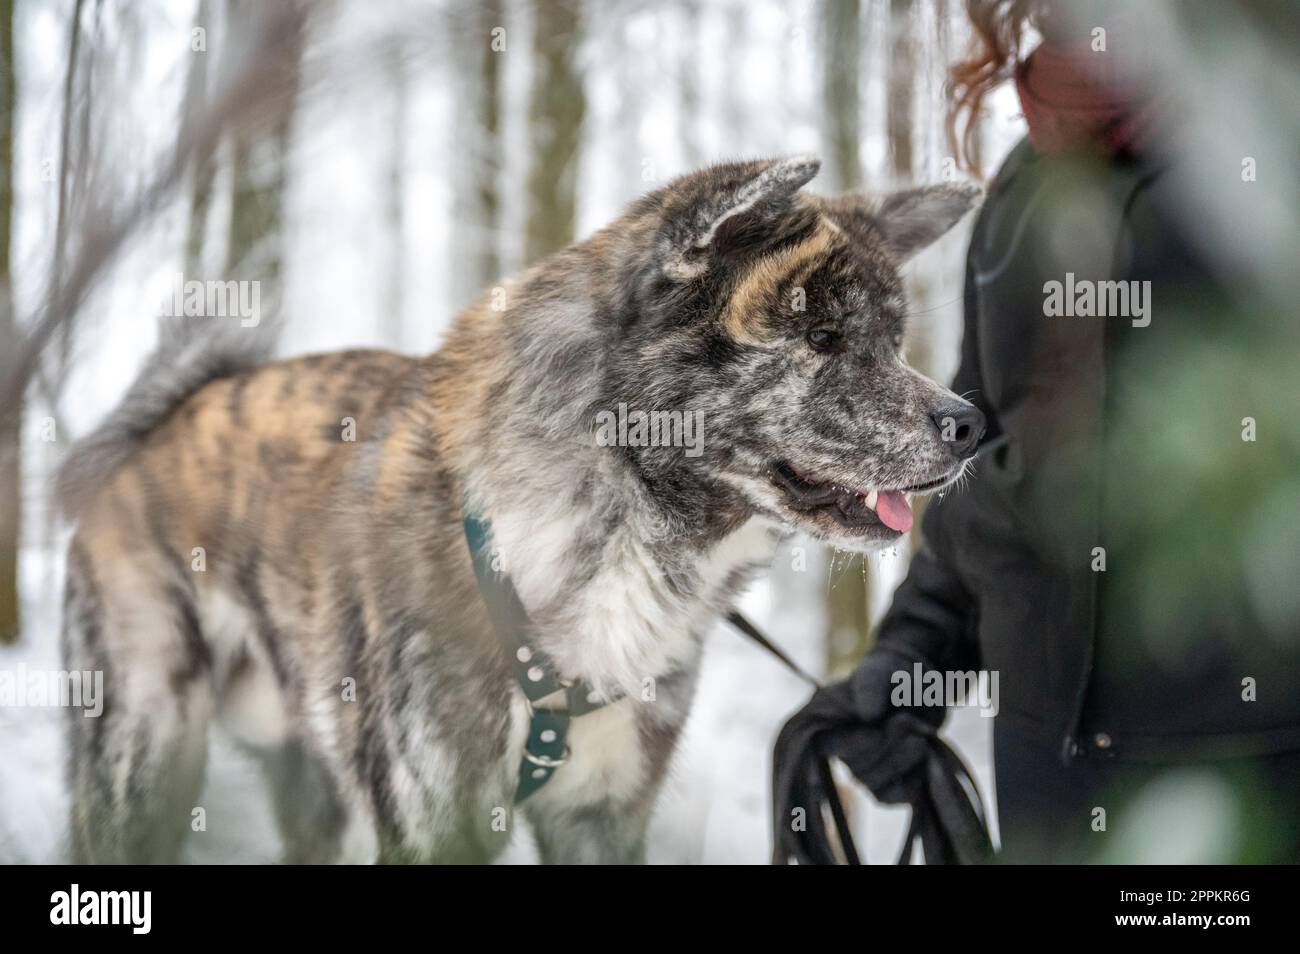 Akita inu dog with gray and orange fur is standing next to his female master with brown curly hair during winter with forest and snow in background Stock Photo